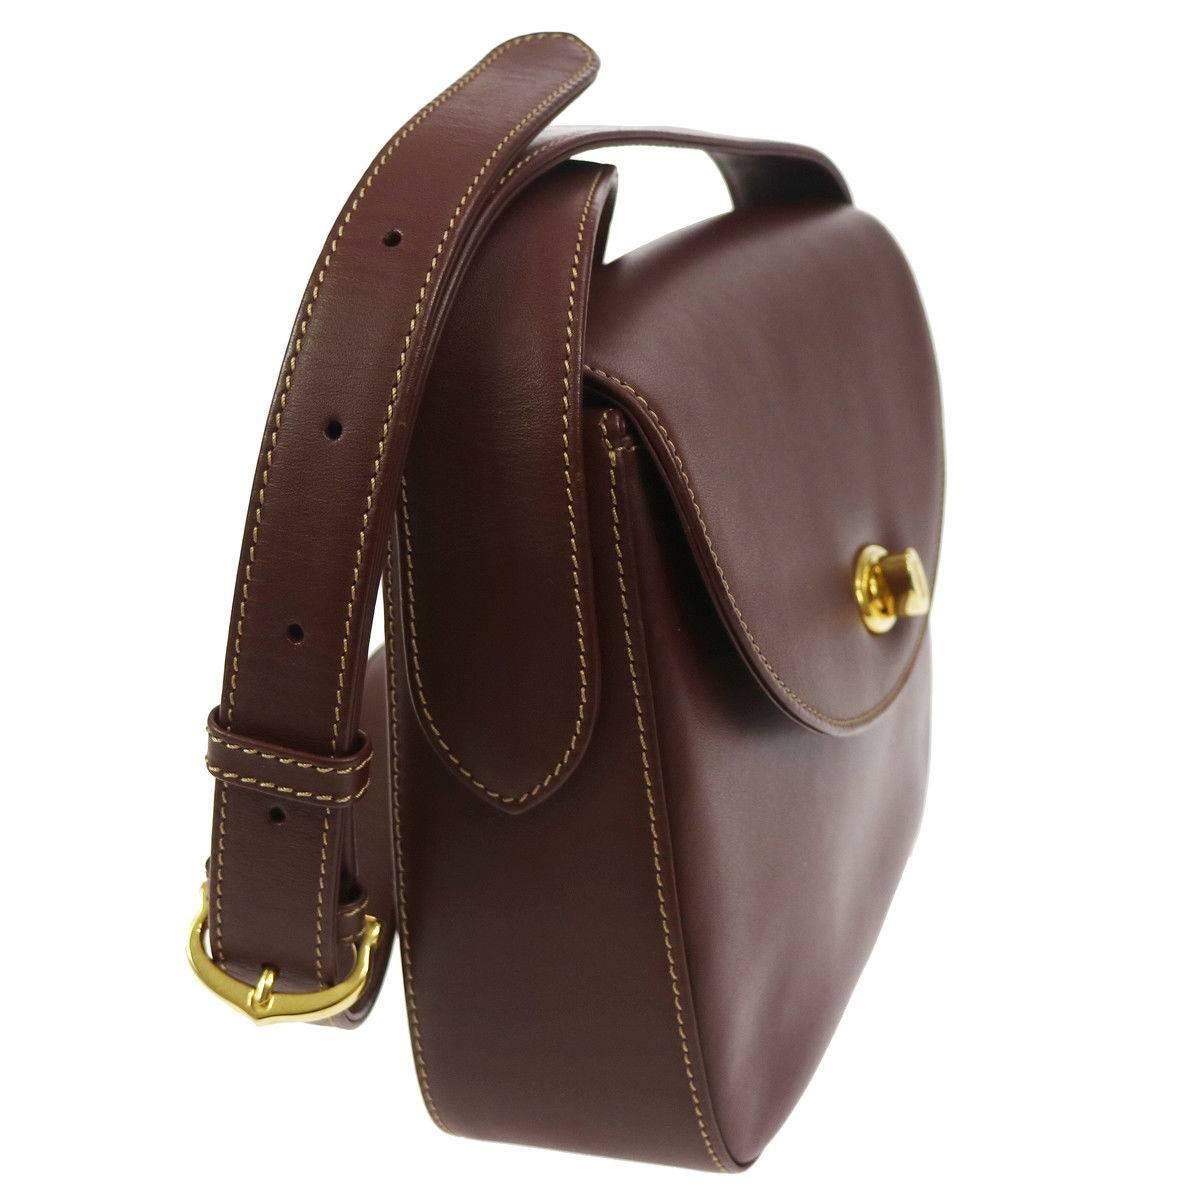 CURATOR'S NOTES

Cartier Bordeaux Leather Gold Saddle Flap Shoulder Crossbody Bag 

Leather
Gold tone hardware
Turn lock closure 
Satin lining 
Made in Italy
Adjustable shoulder strap drop 16-18"
Measures 9.25" W x 6.75" H x 2.5"